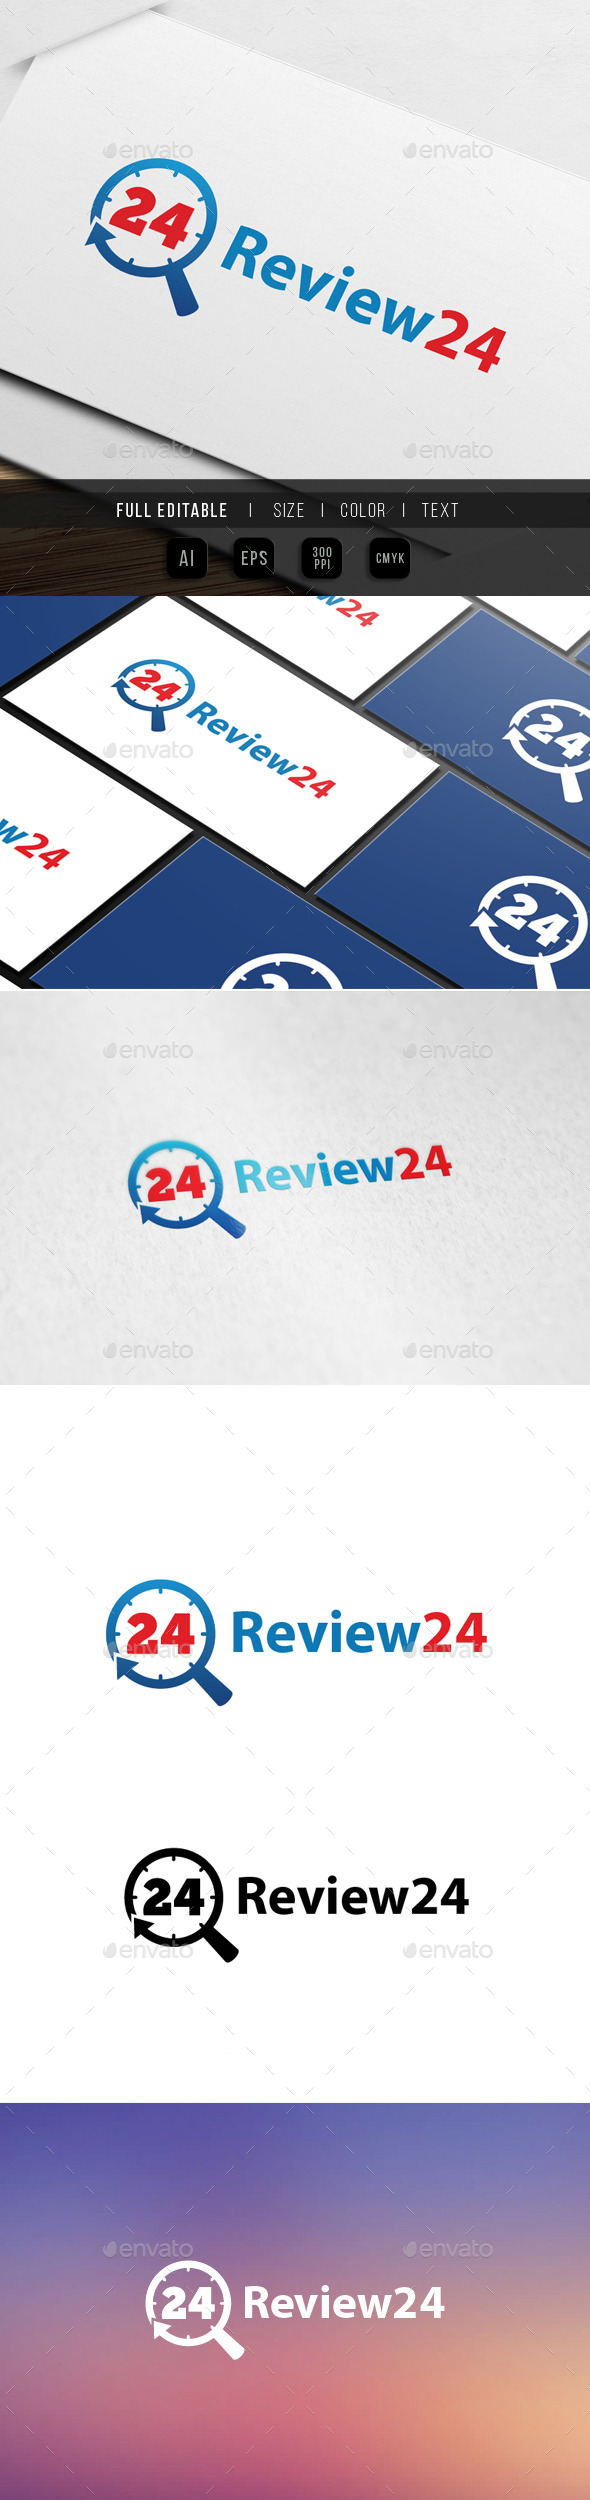 review - search - 24 hour logo